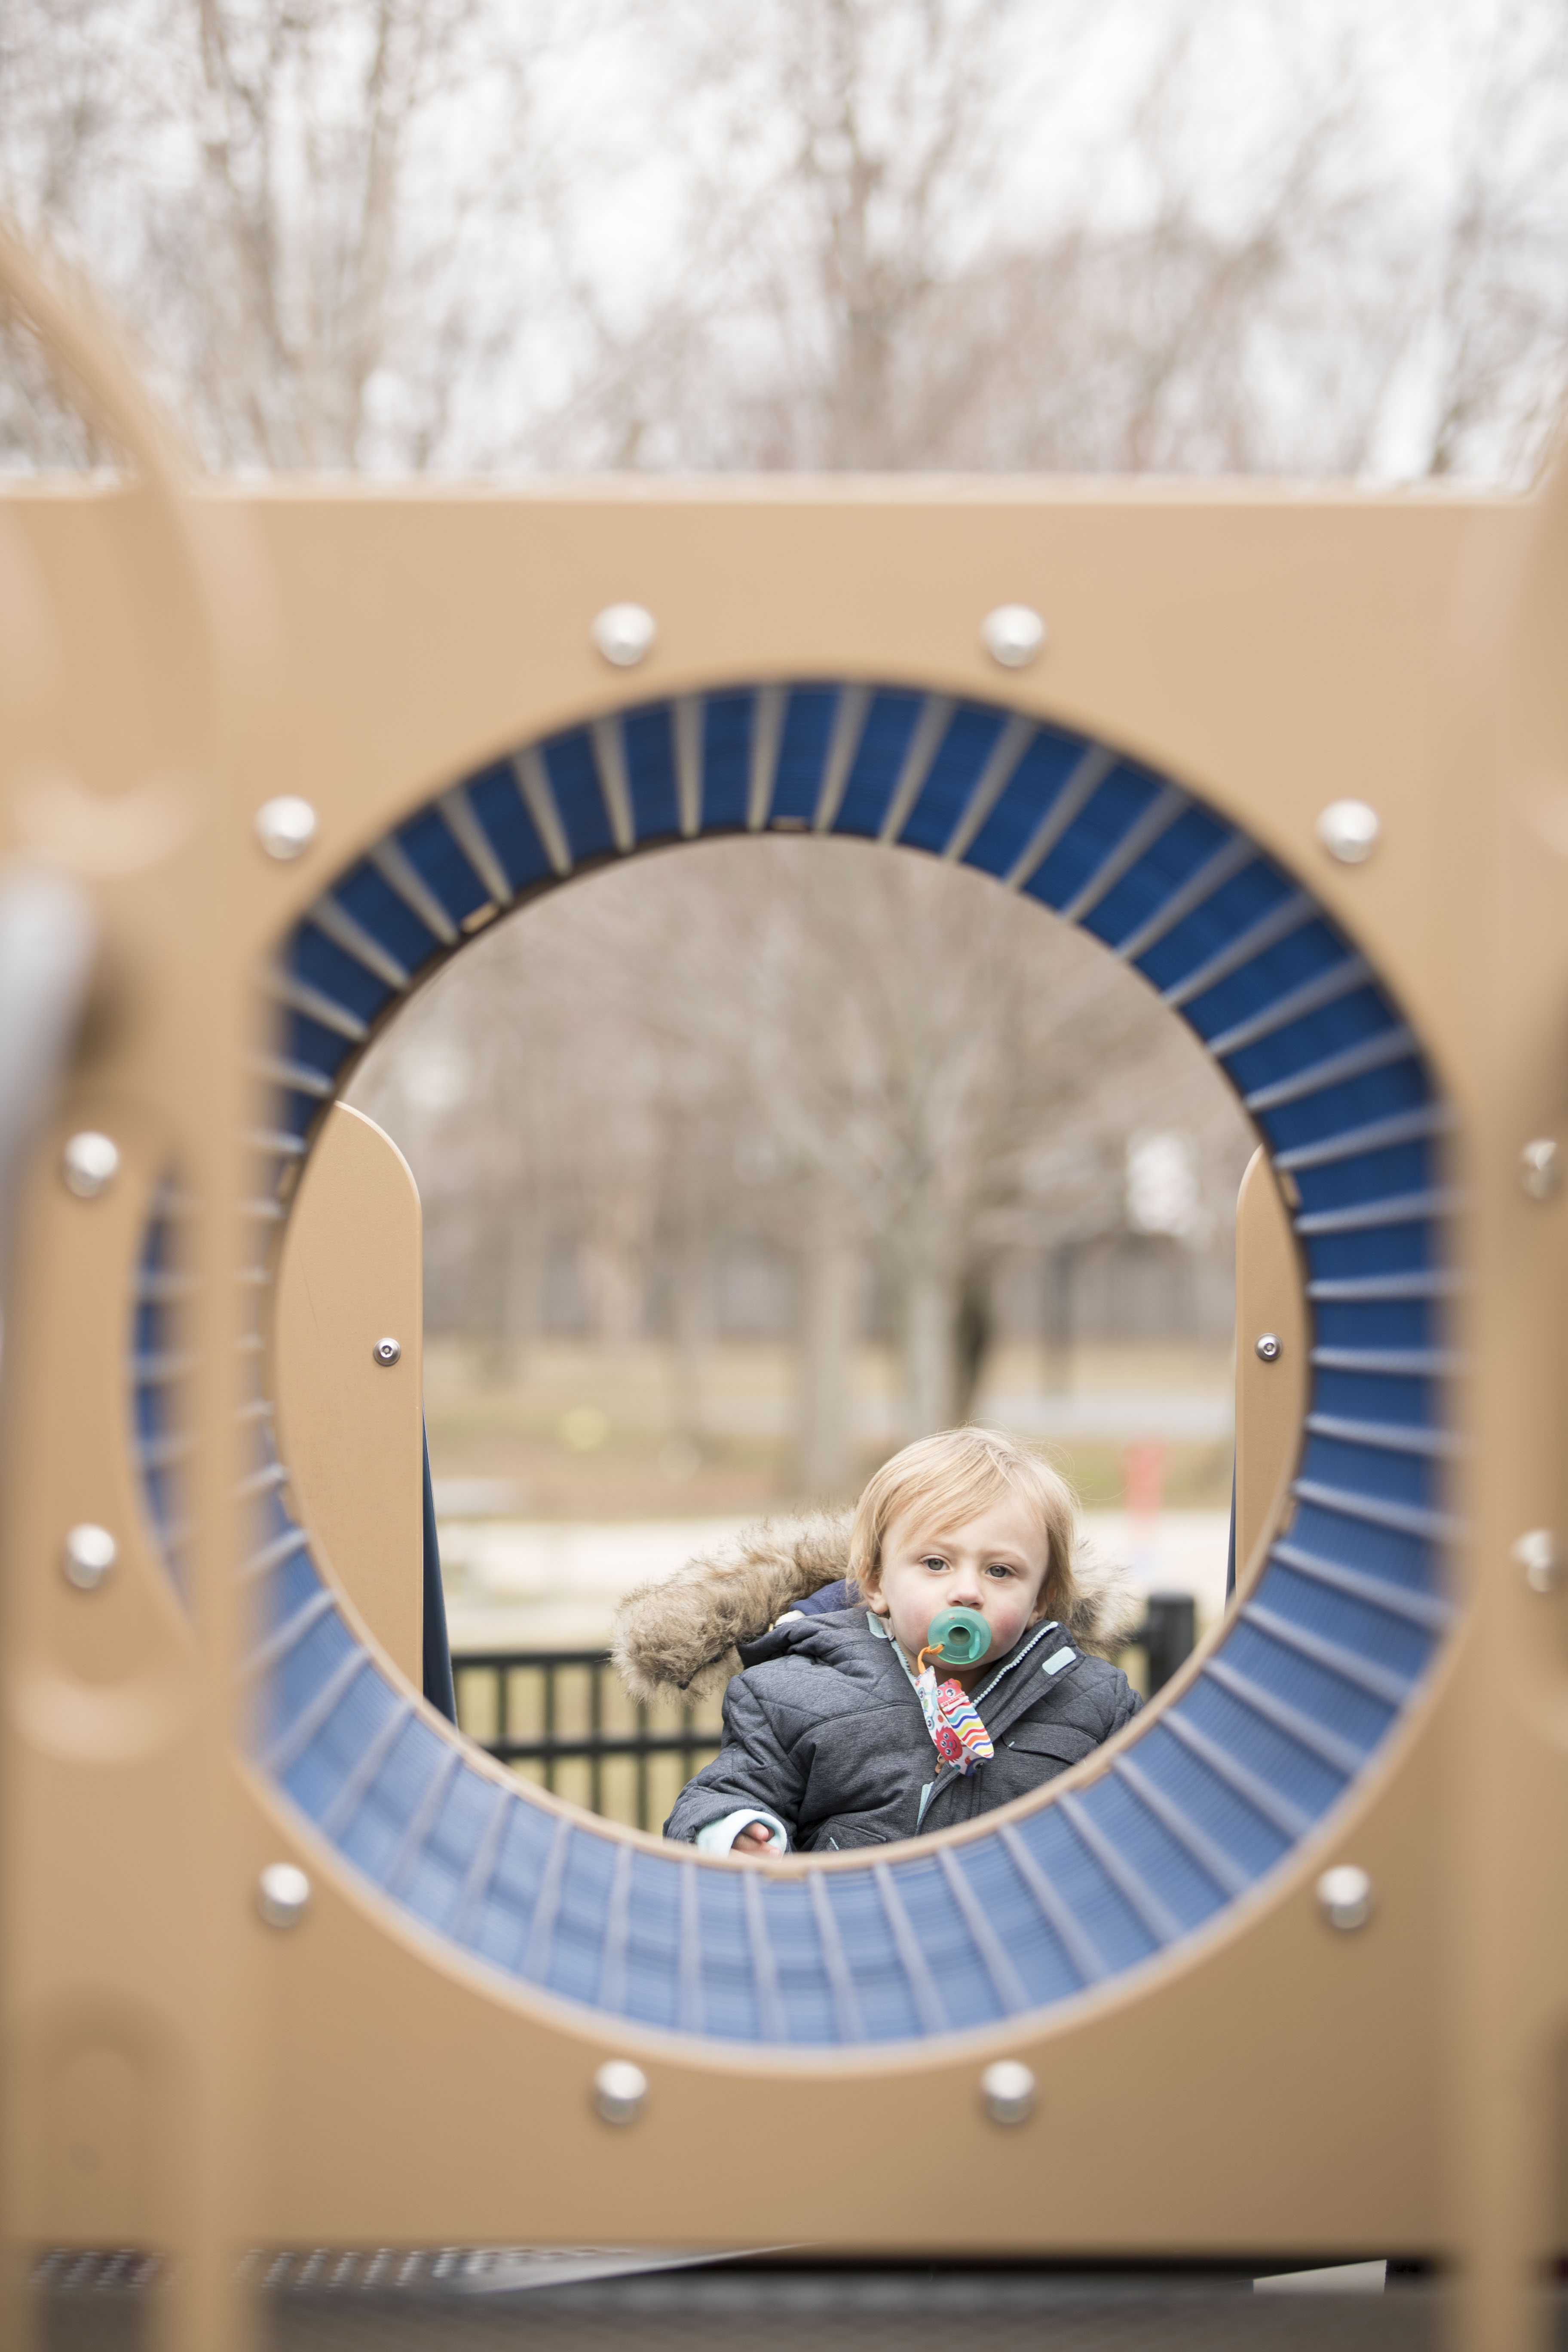 Young boy sitting on a bench through playground equipment